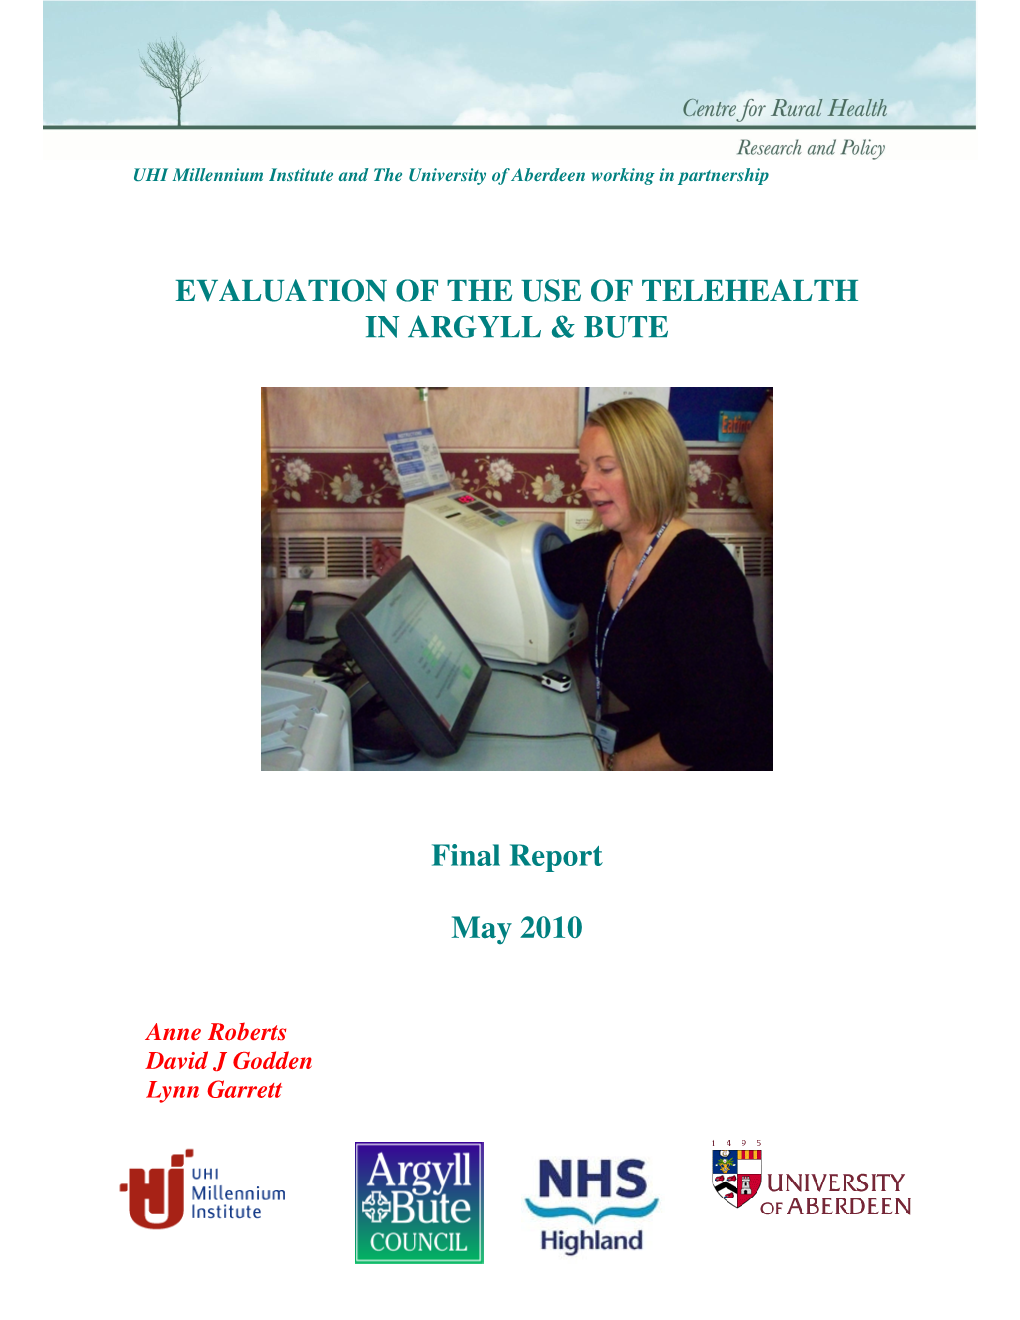 Evaluation of the Use of Telehealth in Argyll & Bute